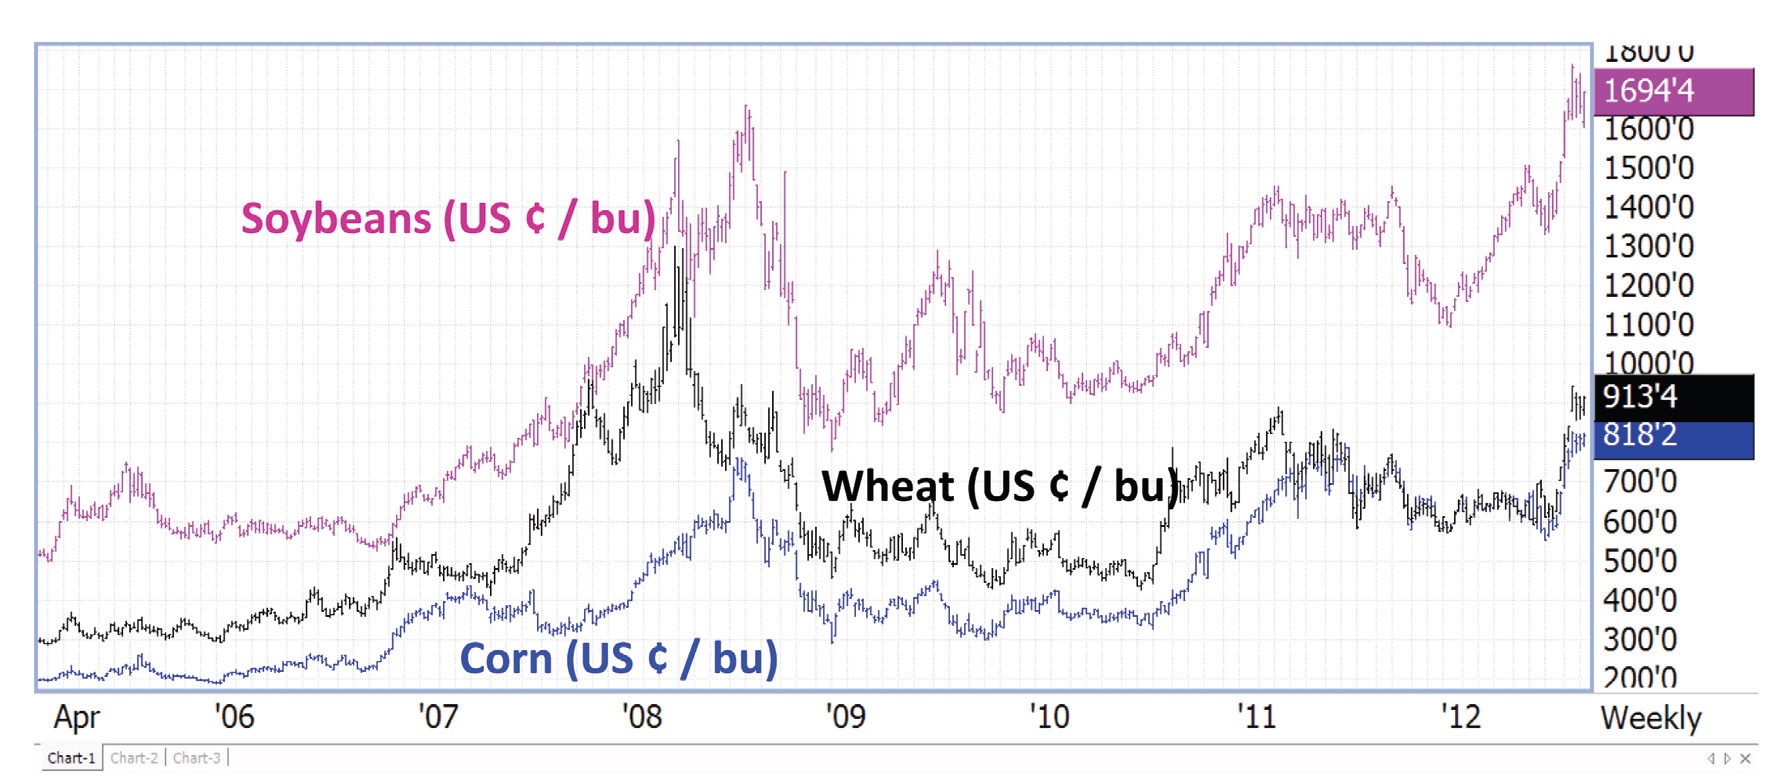 Figure 1. Recent US corn, wheat, and soybean price history (Data source: Future markets)